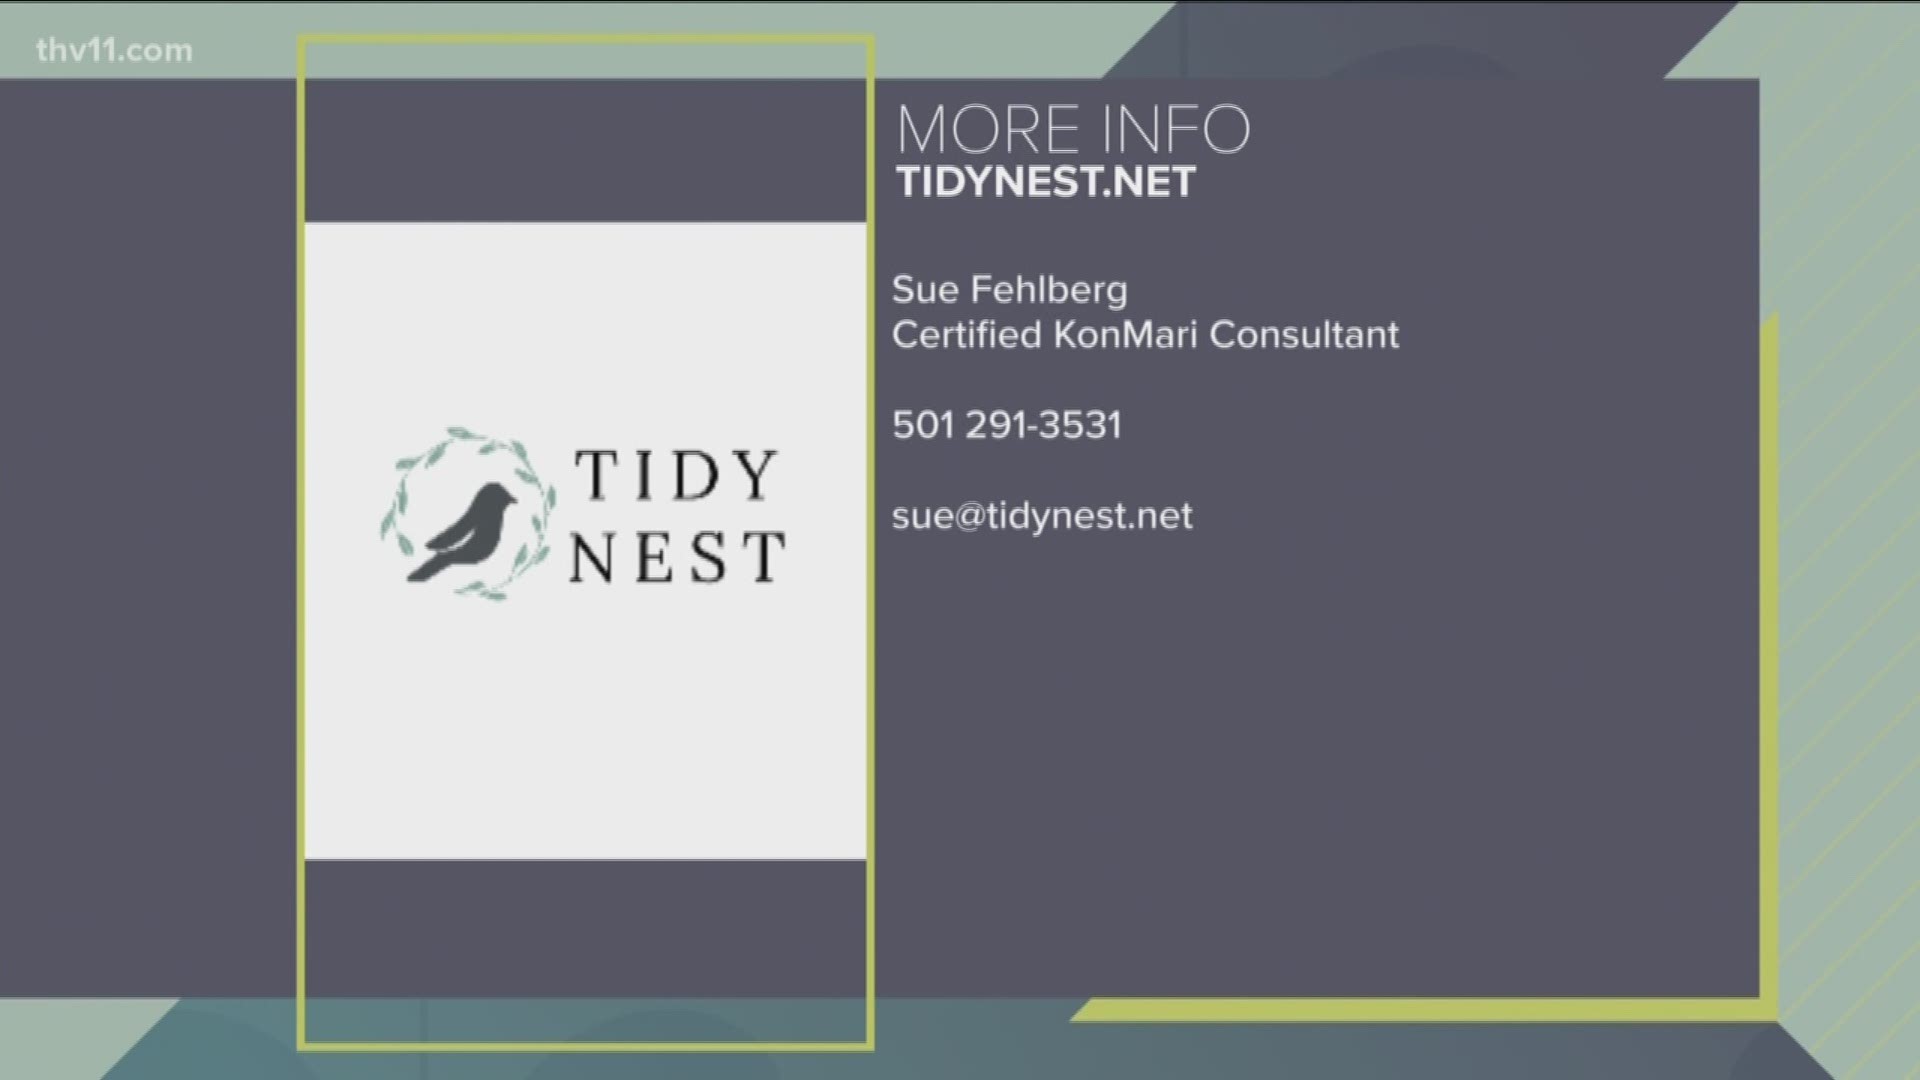 Sue Fehlberg with Tidy Nest is helping us spark joy in our lives with some simple tips to tackle in the new year.